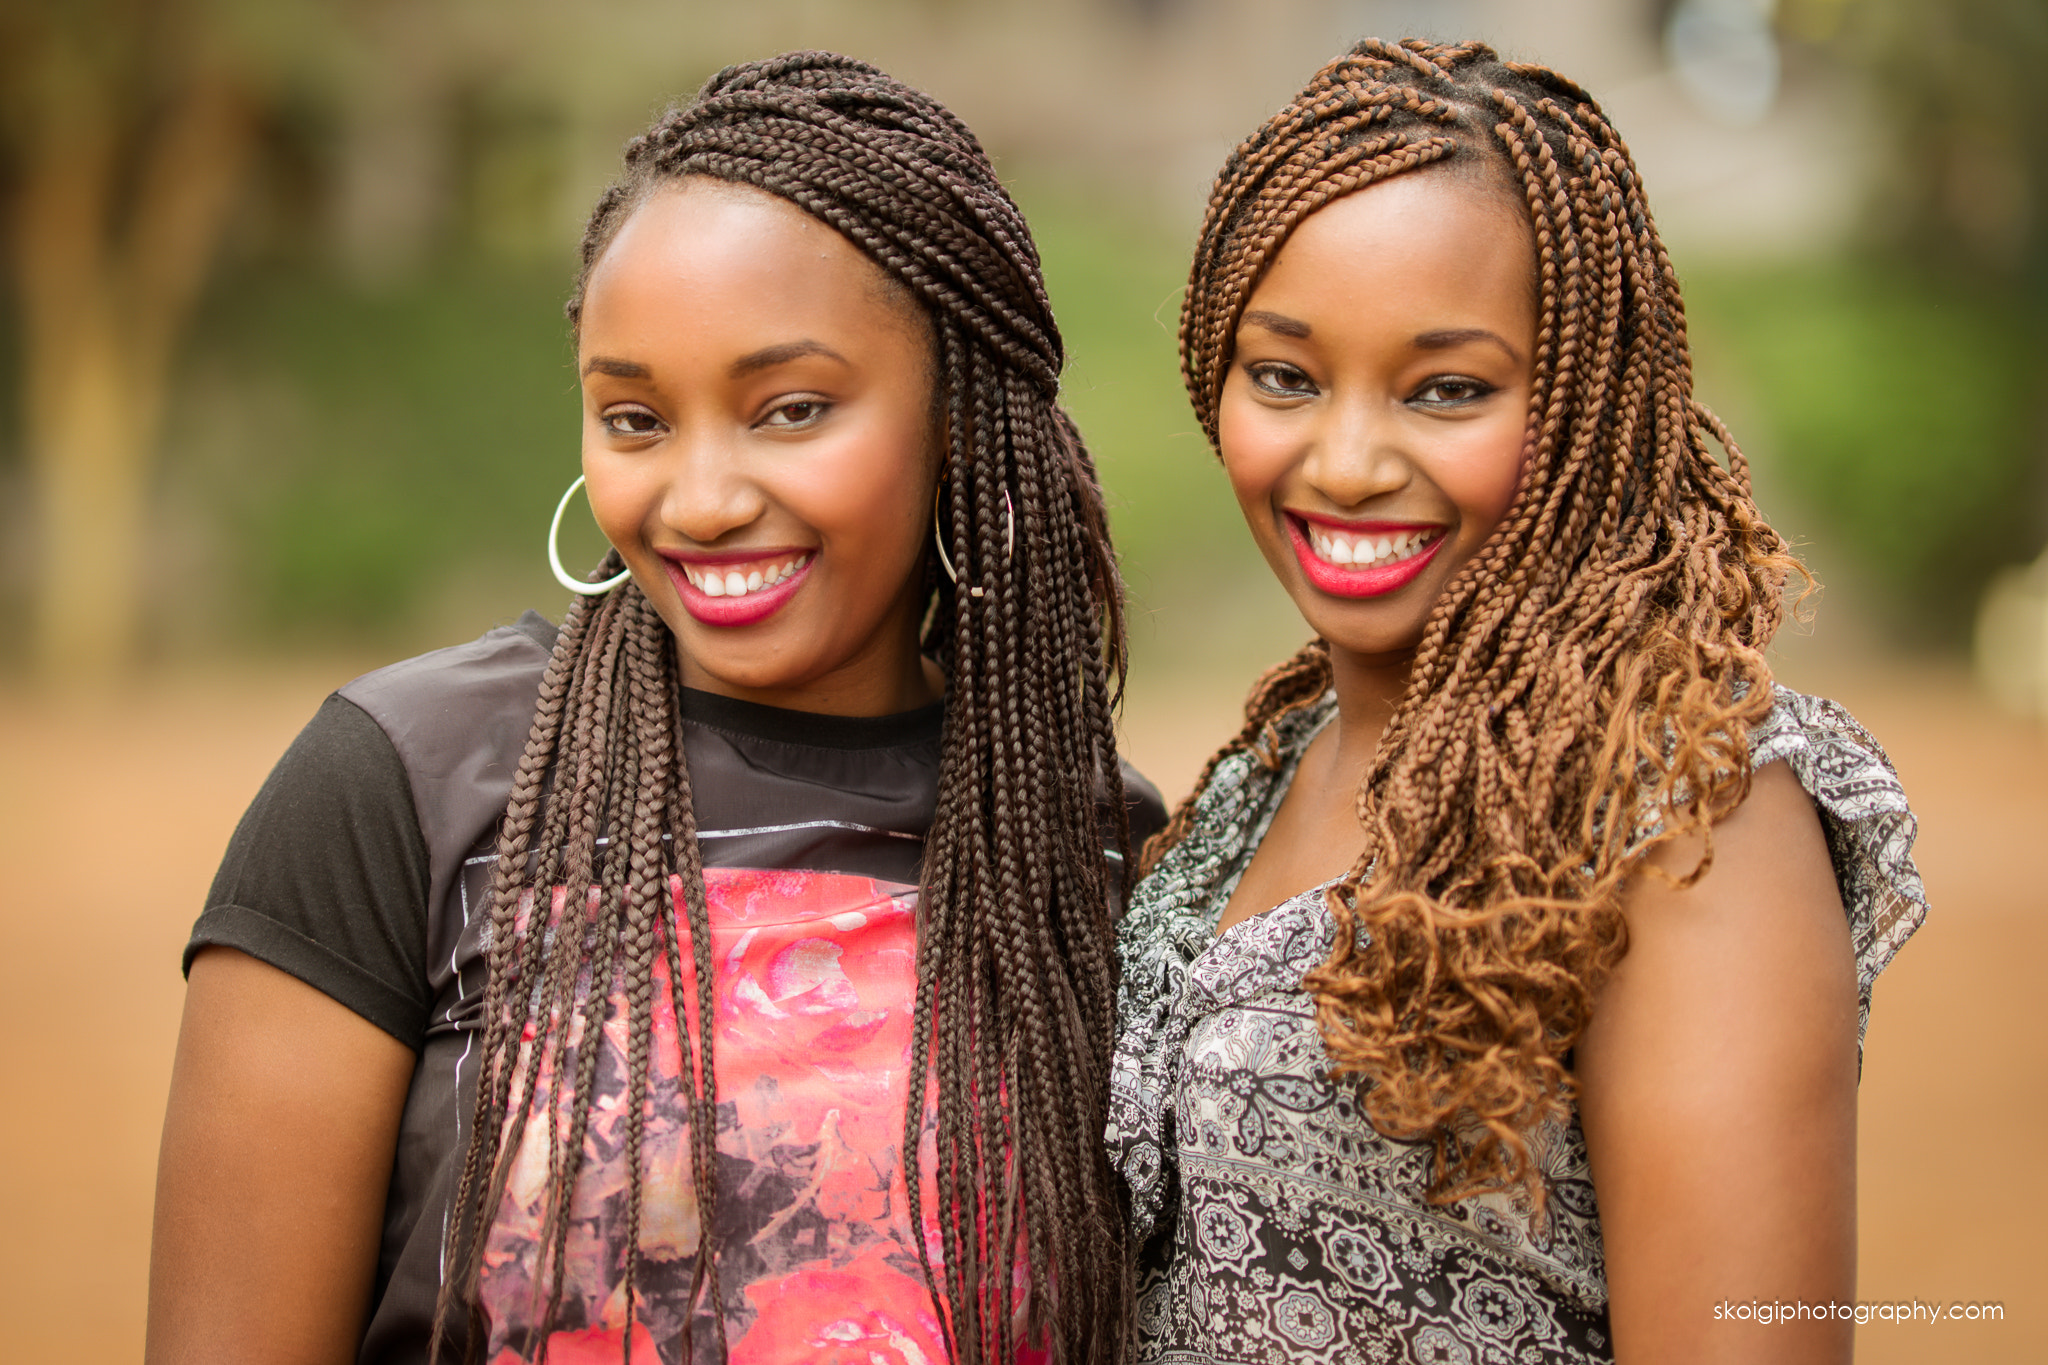 Samsung NX 85mm F1.4 ED SSA sample photo. Identical twins with identical smiles photography